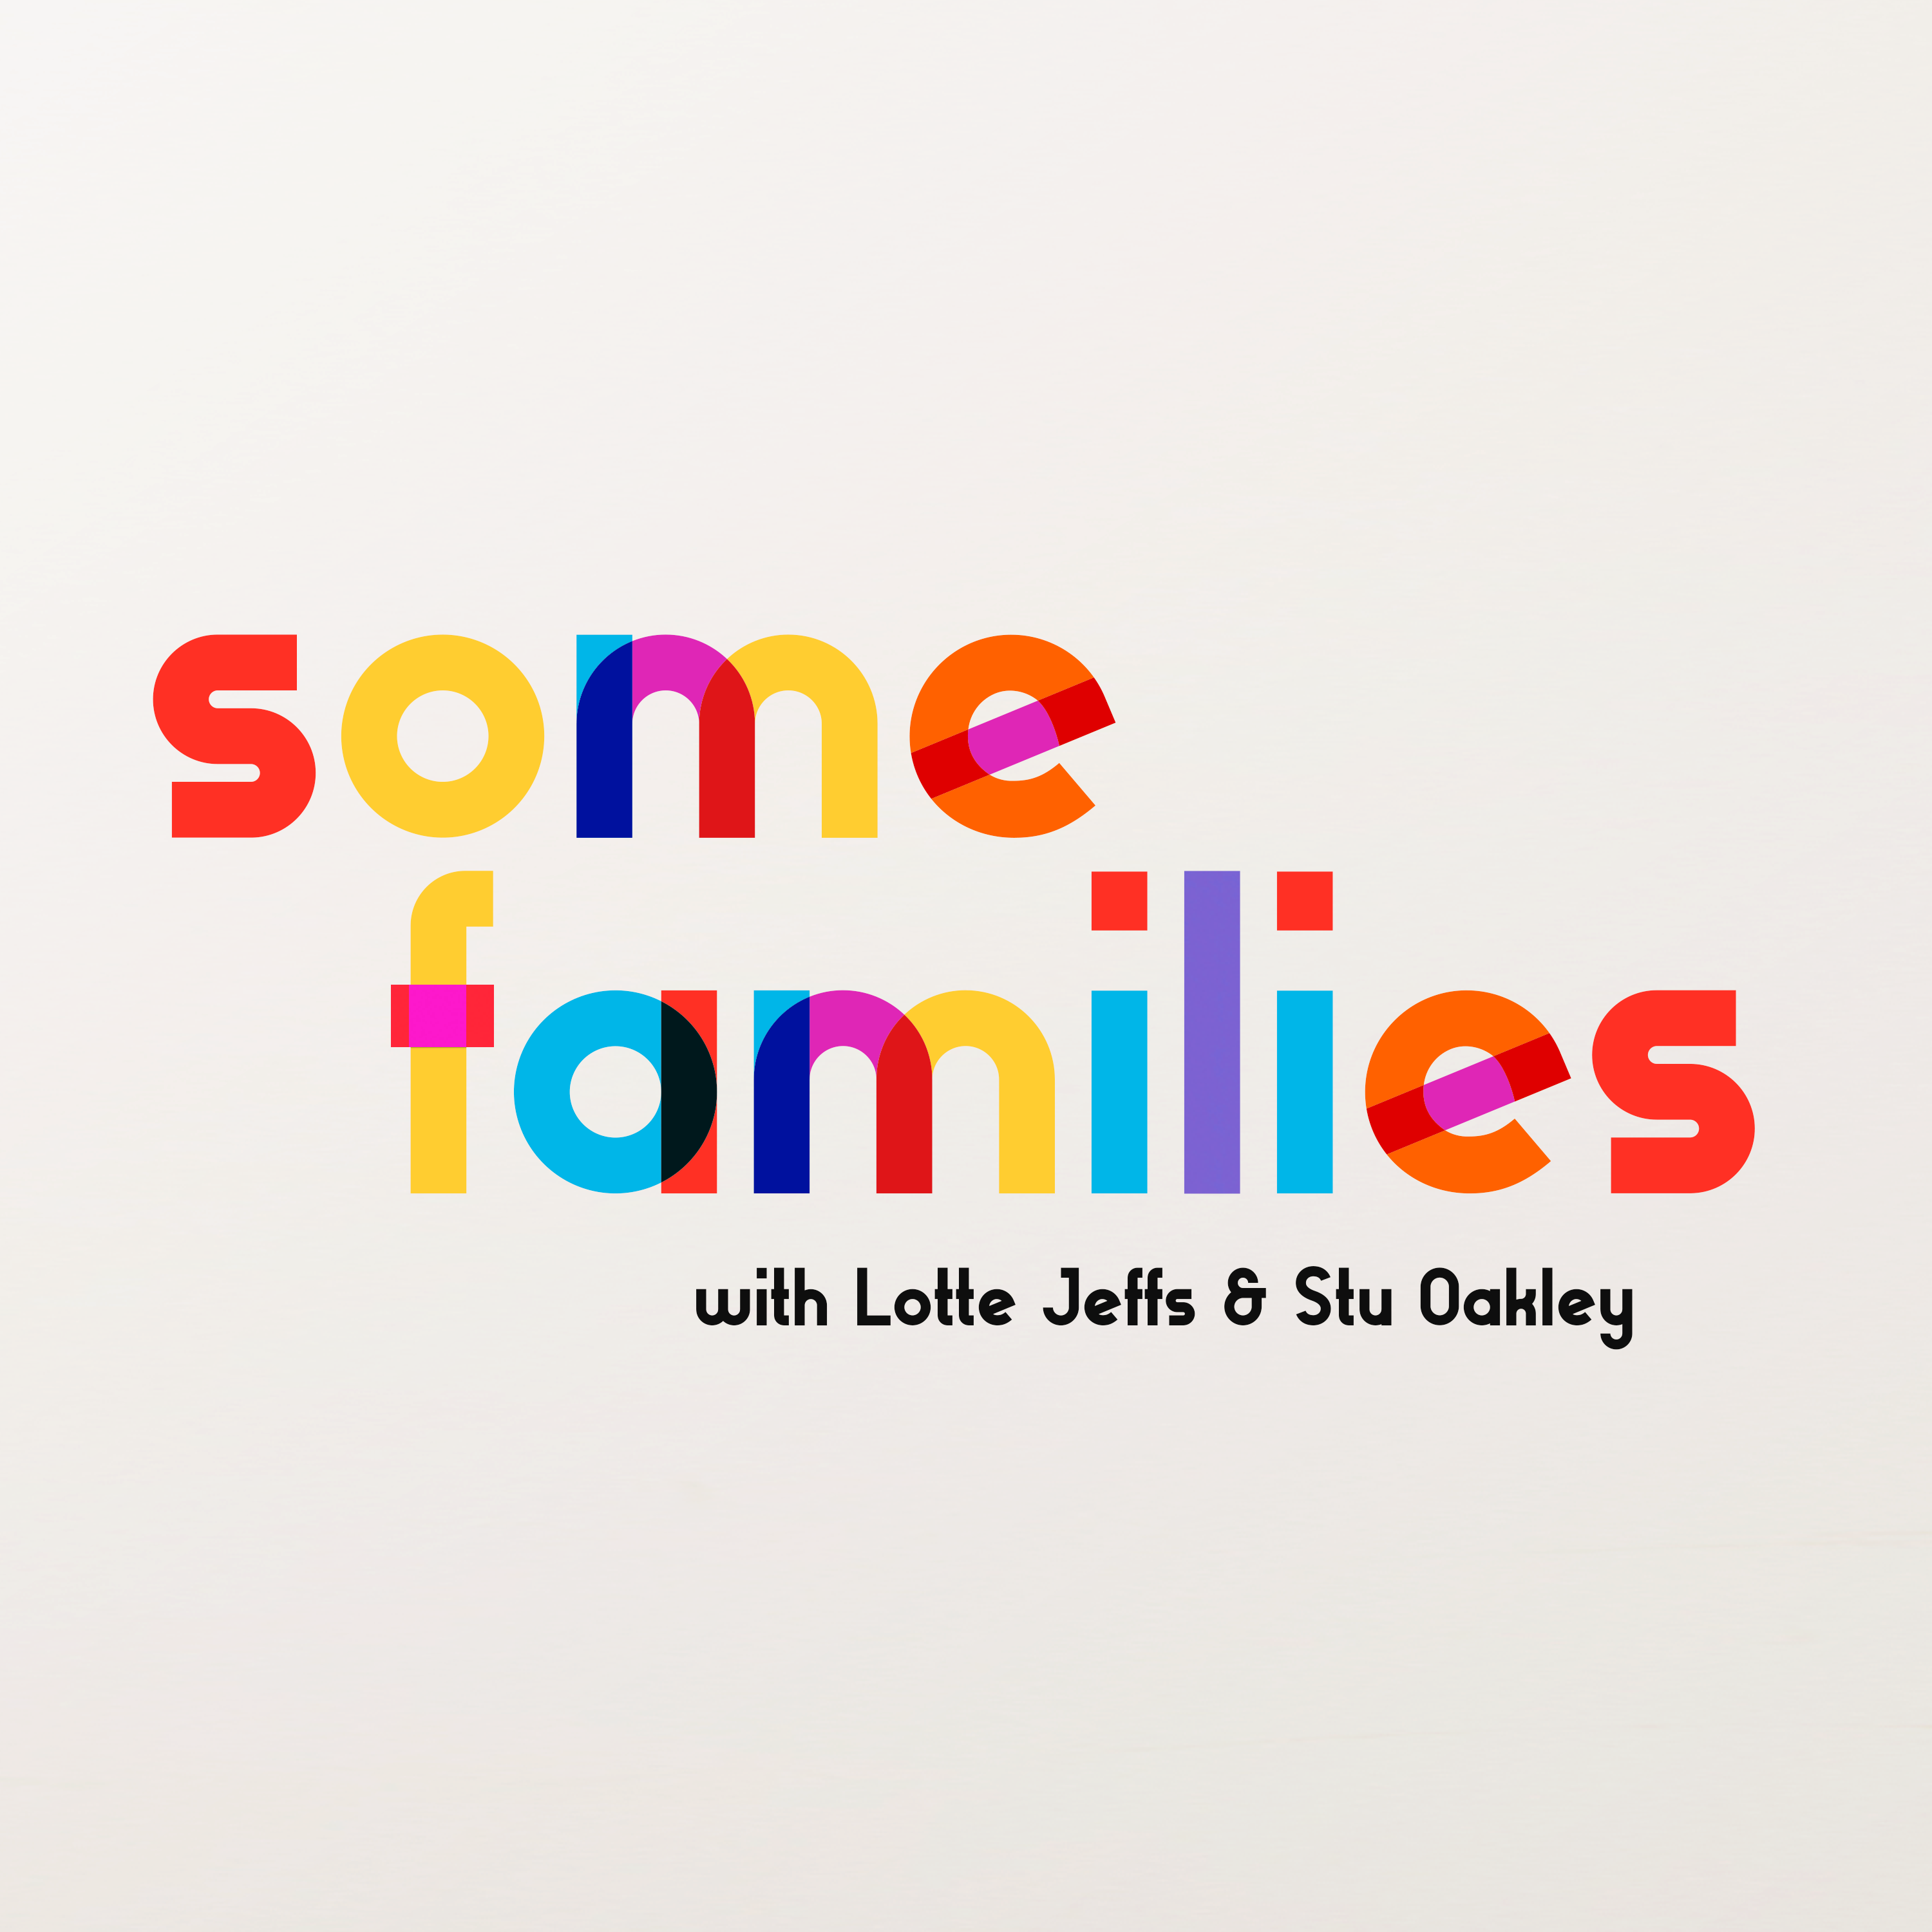 Trans-racial and LGBTQ+ Adoption: with Nathan Yungerberg and guest host Leon Wenham